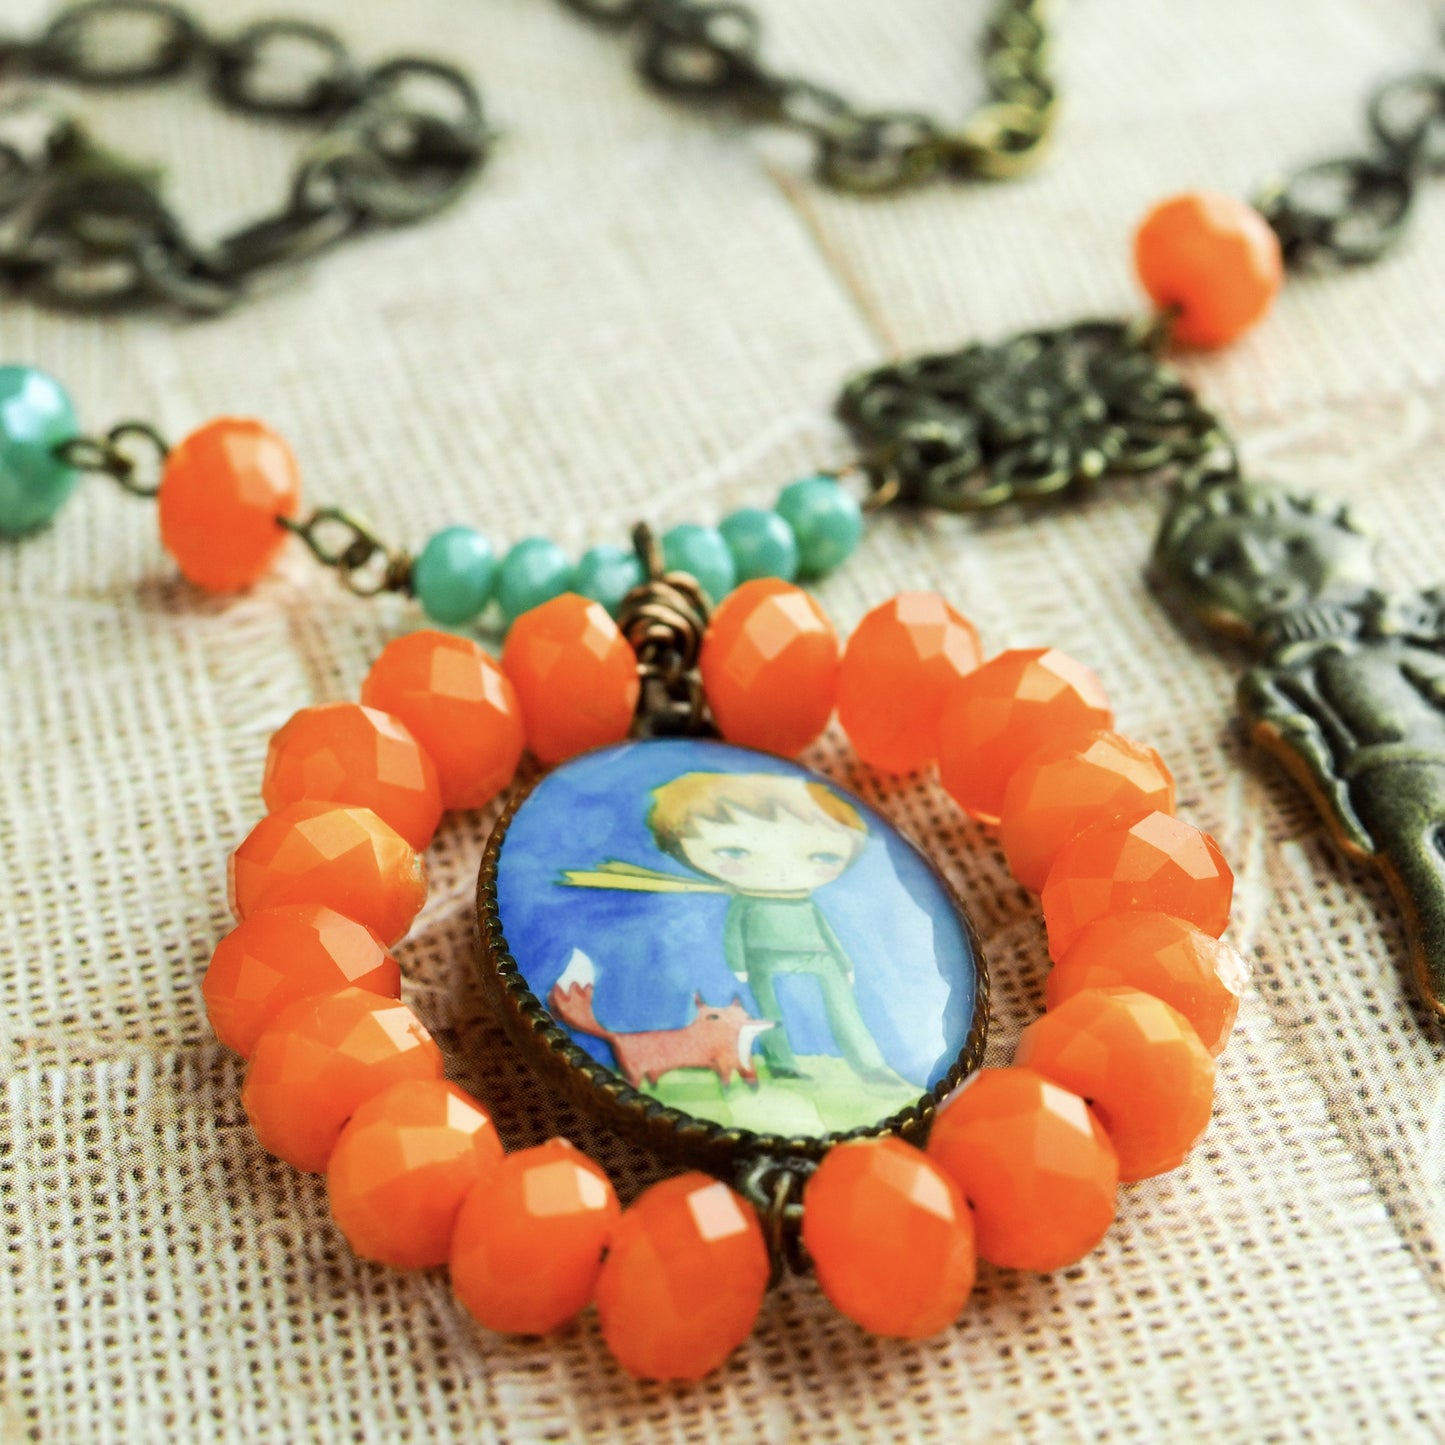 The little prince lives in this handcrafted necklace. Hand made by the talented mixed media artist, Danita.